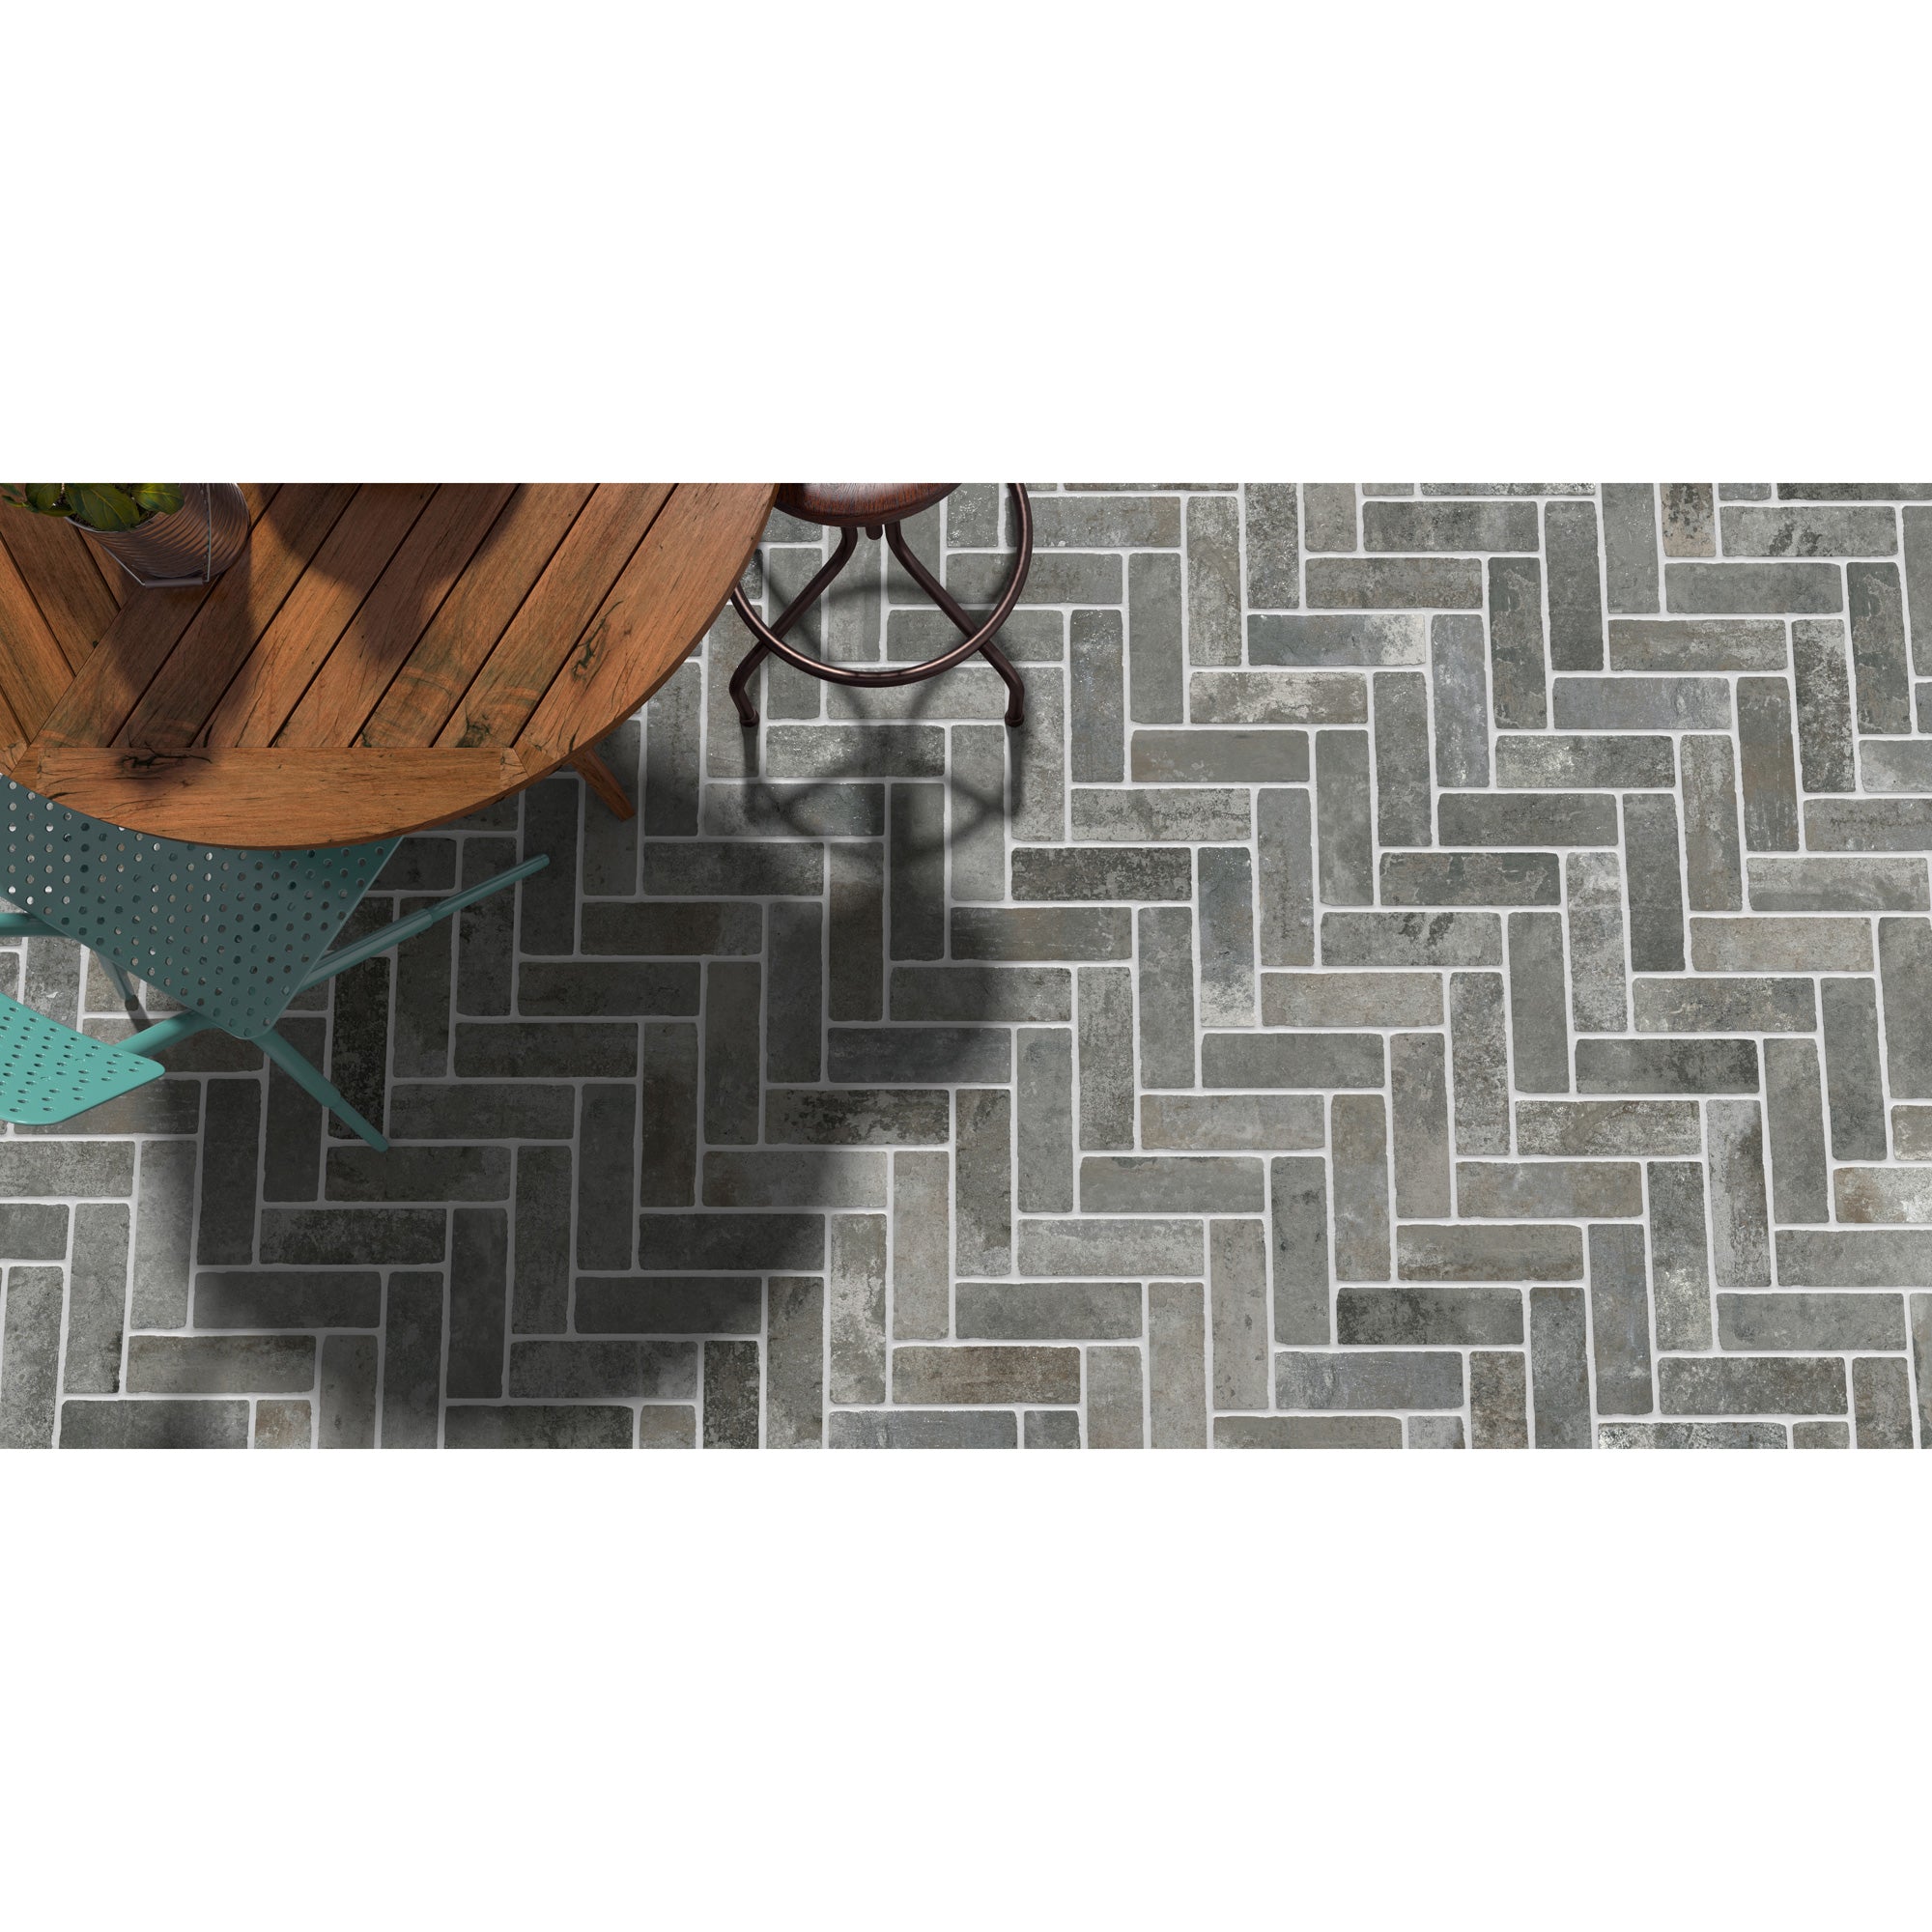 Happy Floors - French Quarter 3 in. x 10 in. Brick Tile - Bienville